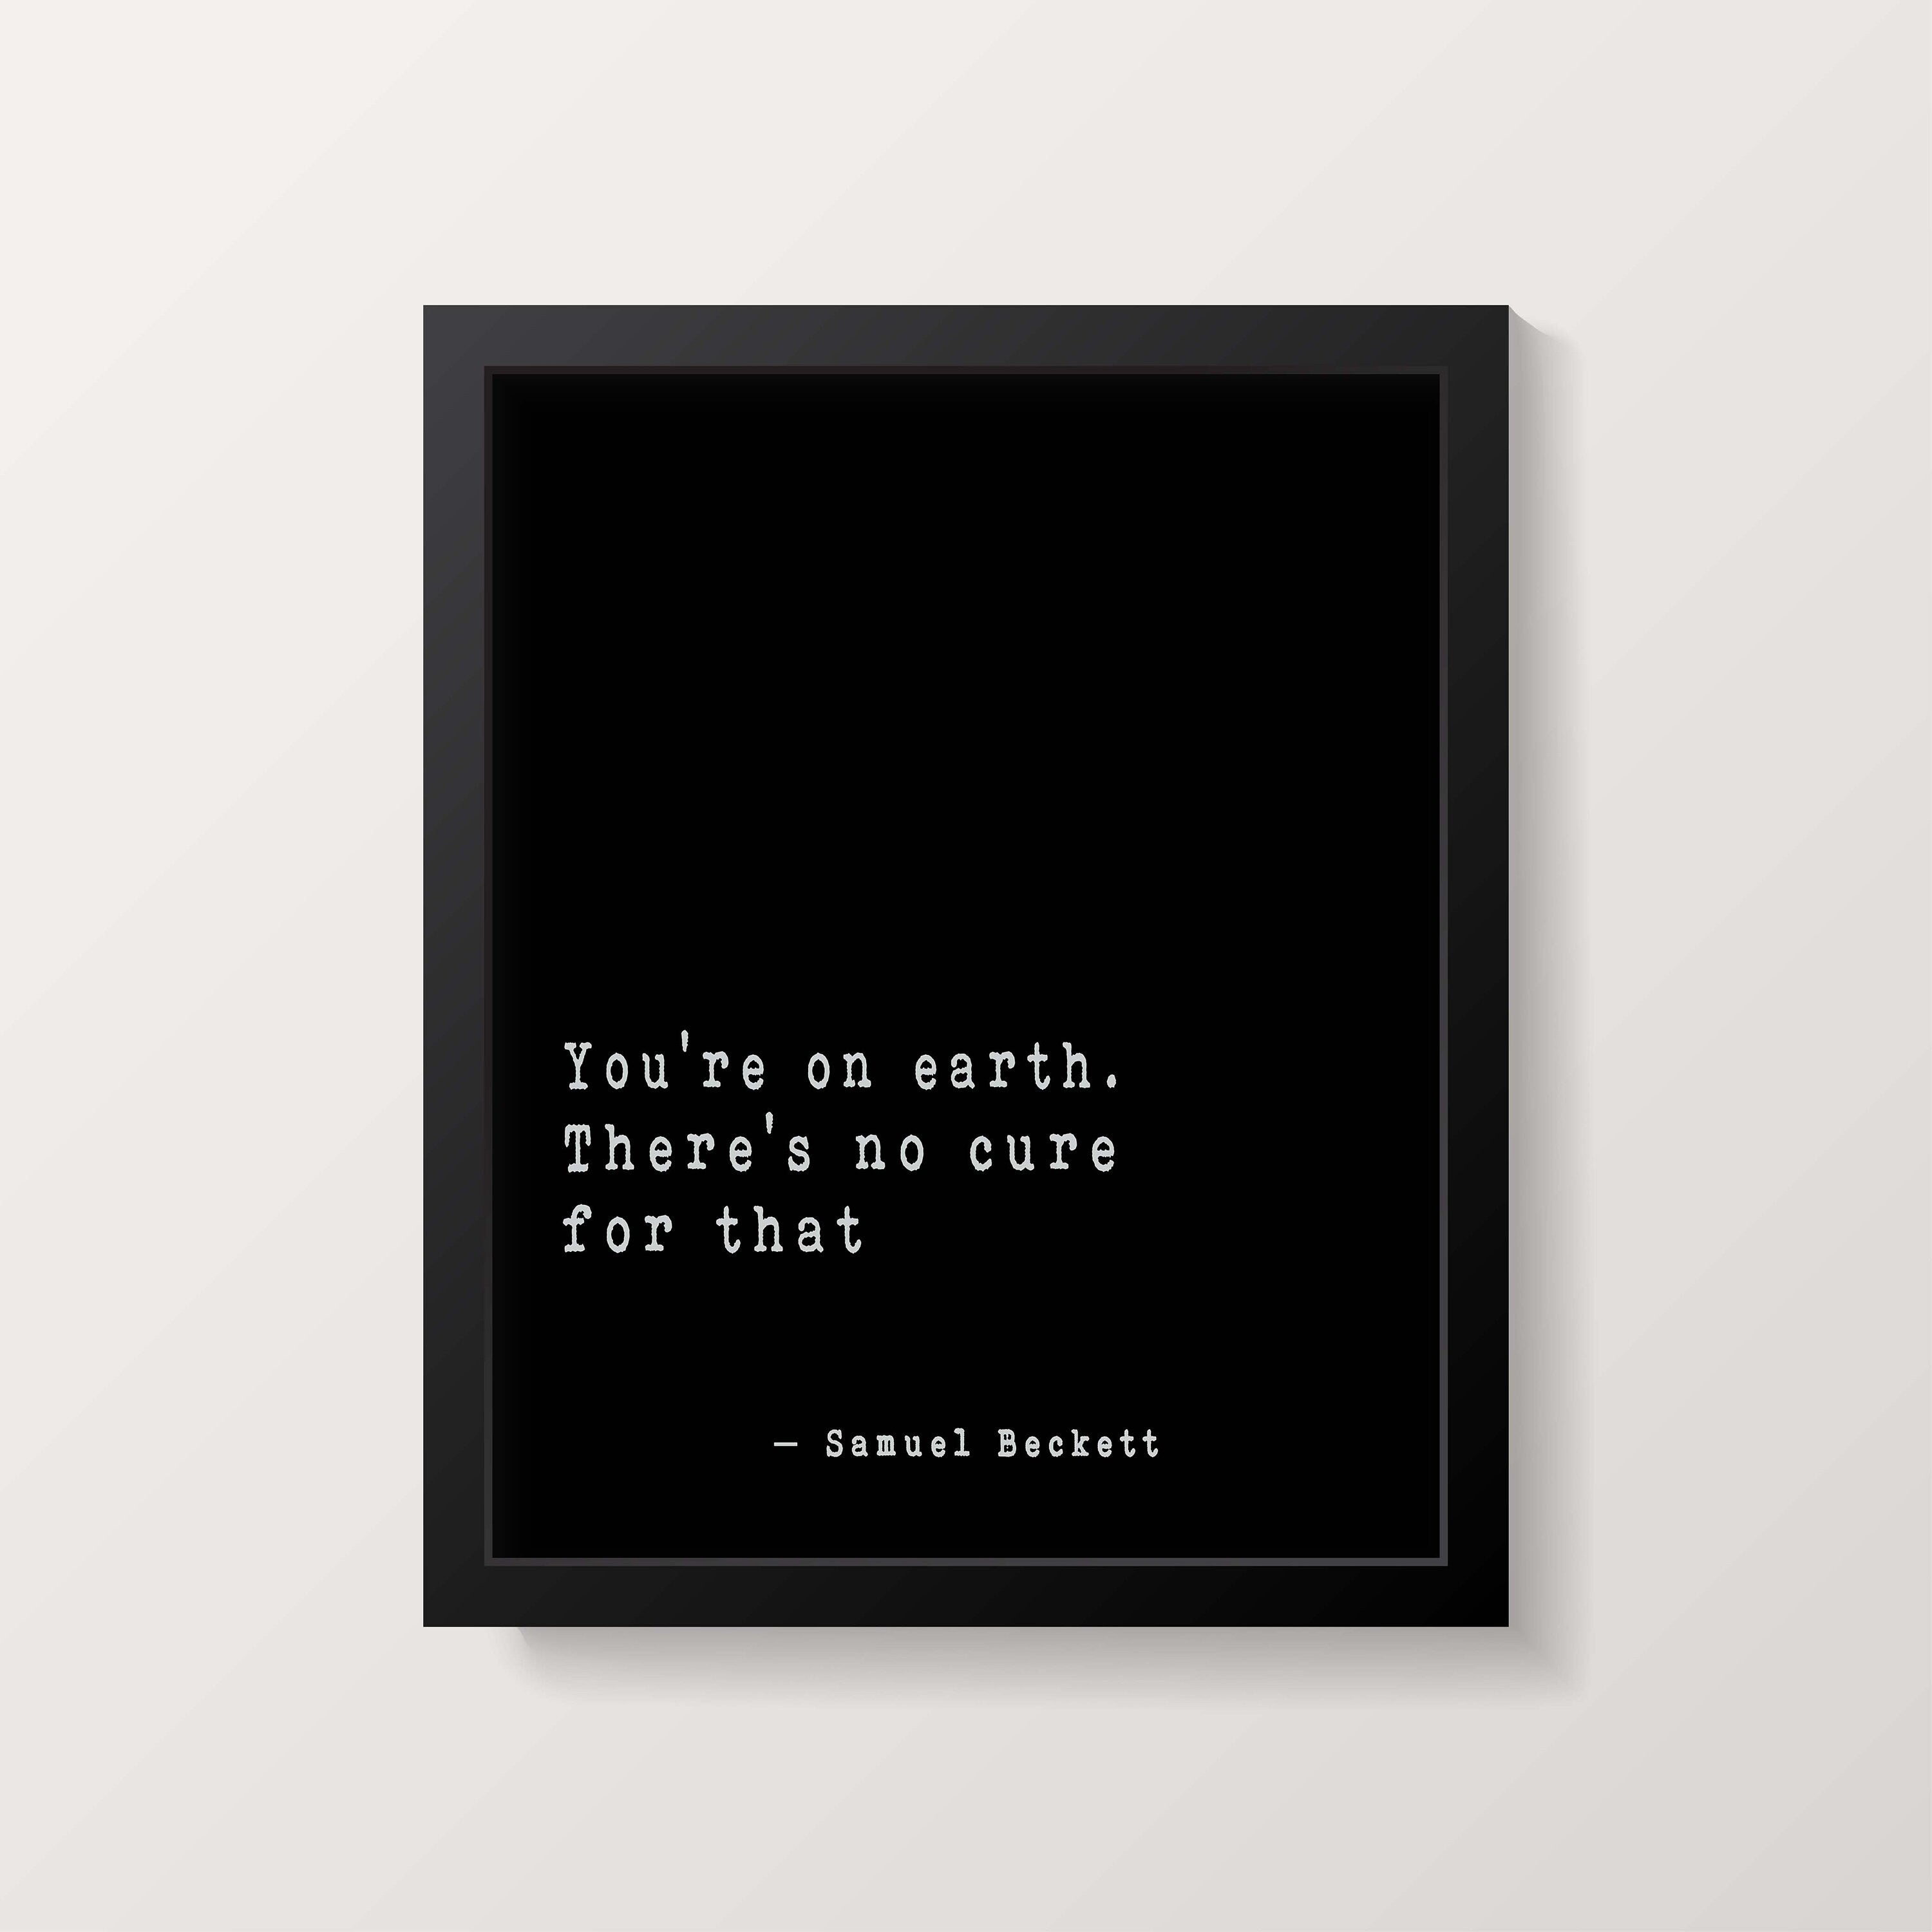 Samuel Beckett Quote Print, You're on earth there's no cure for that